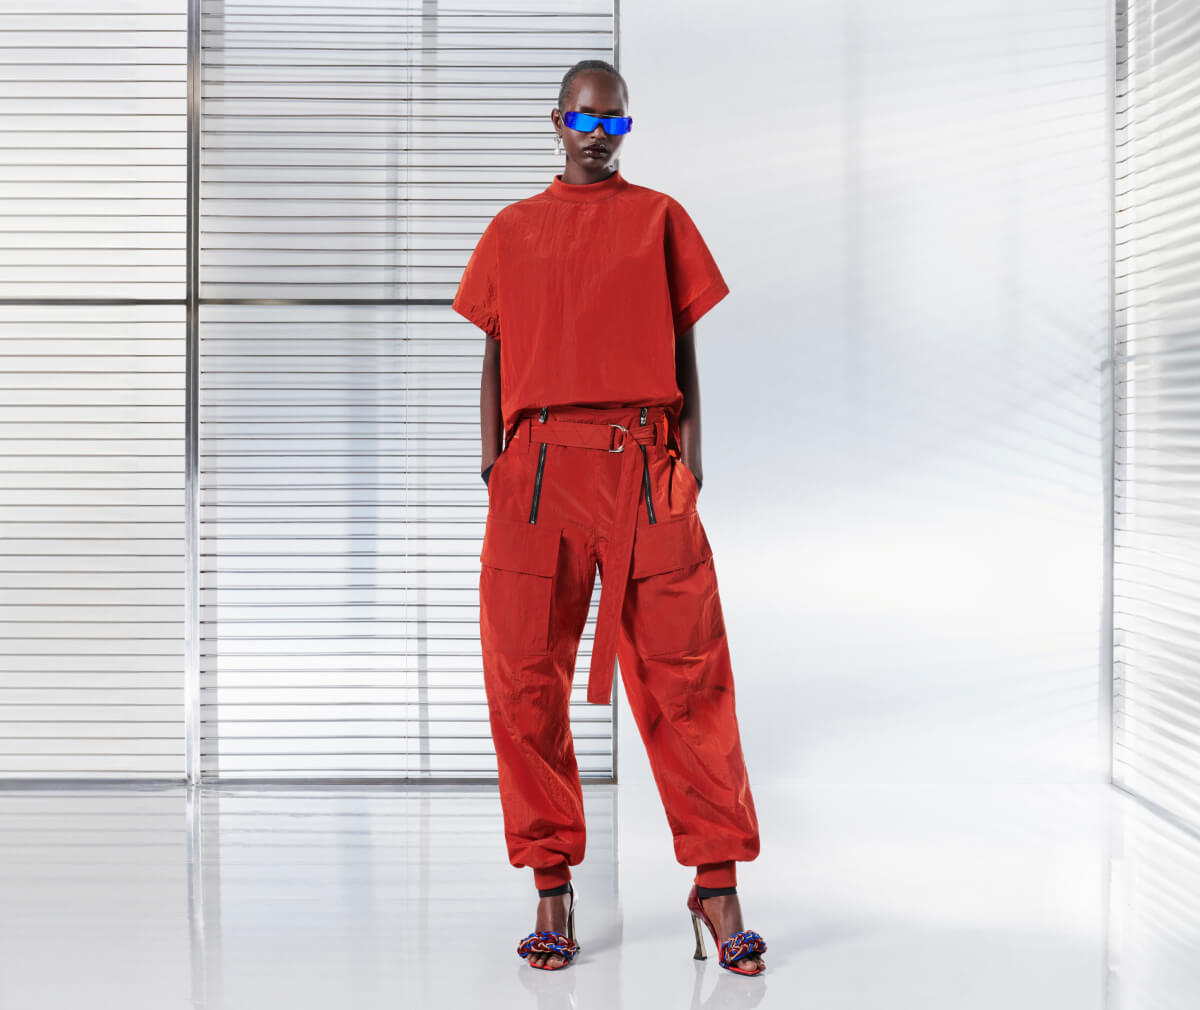 Ferrari total look with fluid T-shirt, parachute trousers and woven sandals